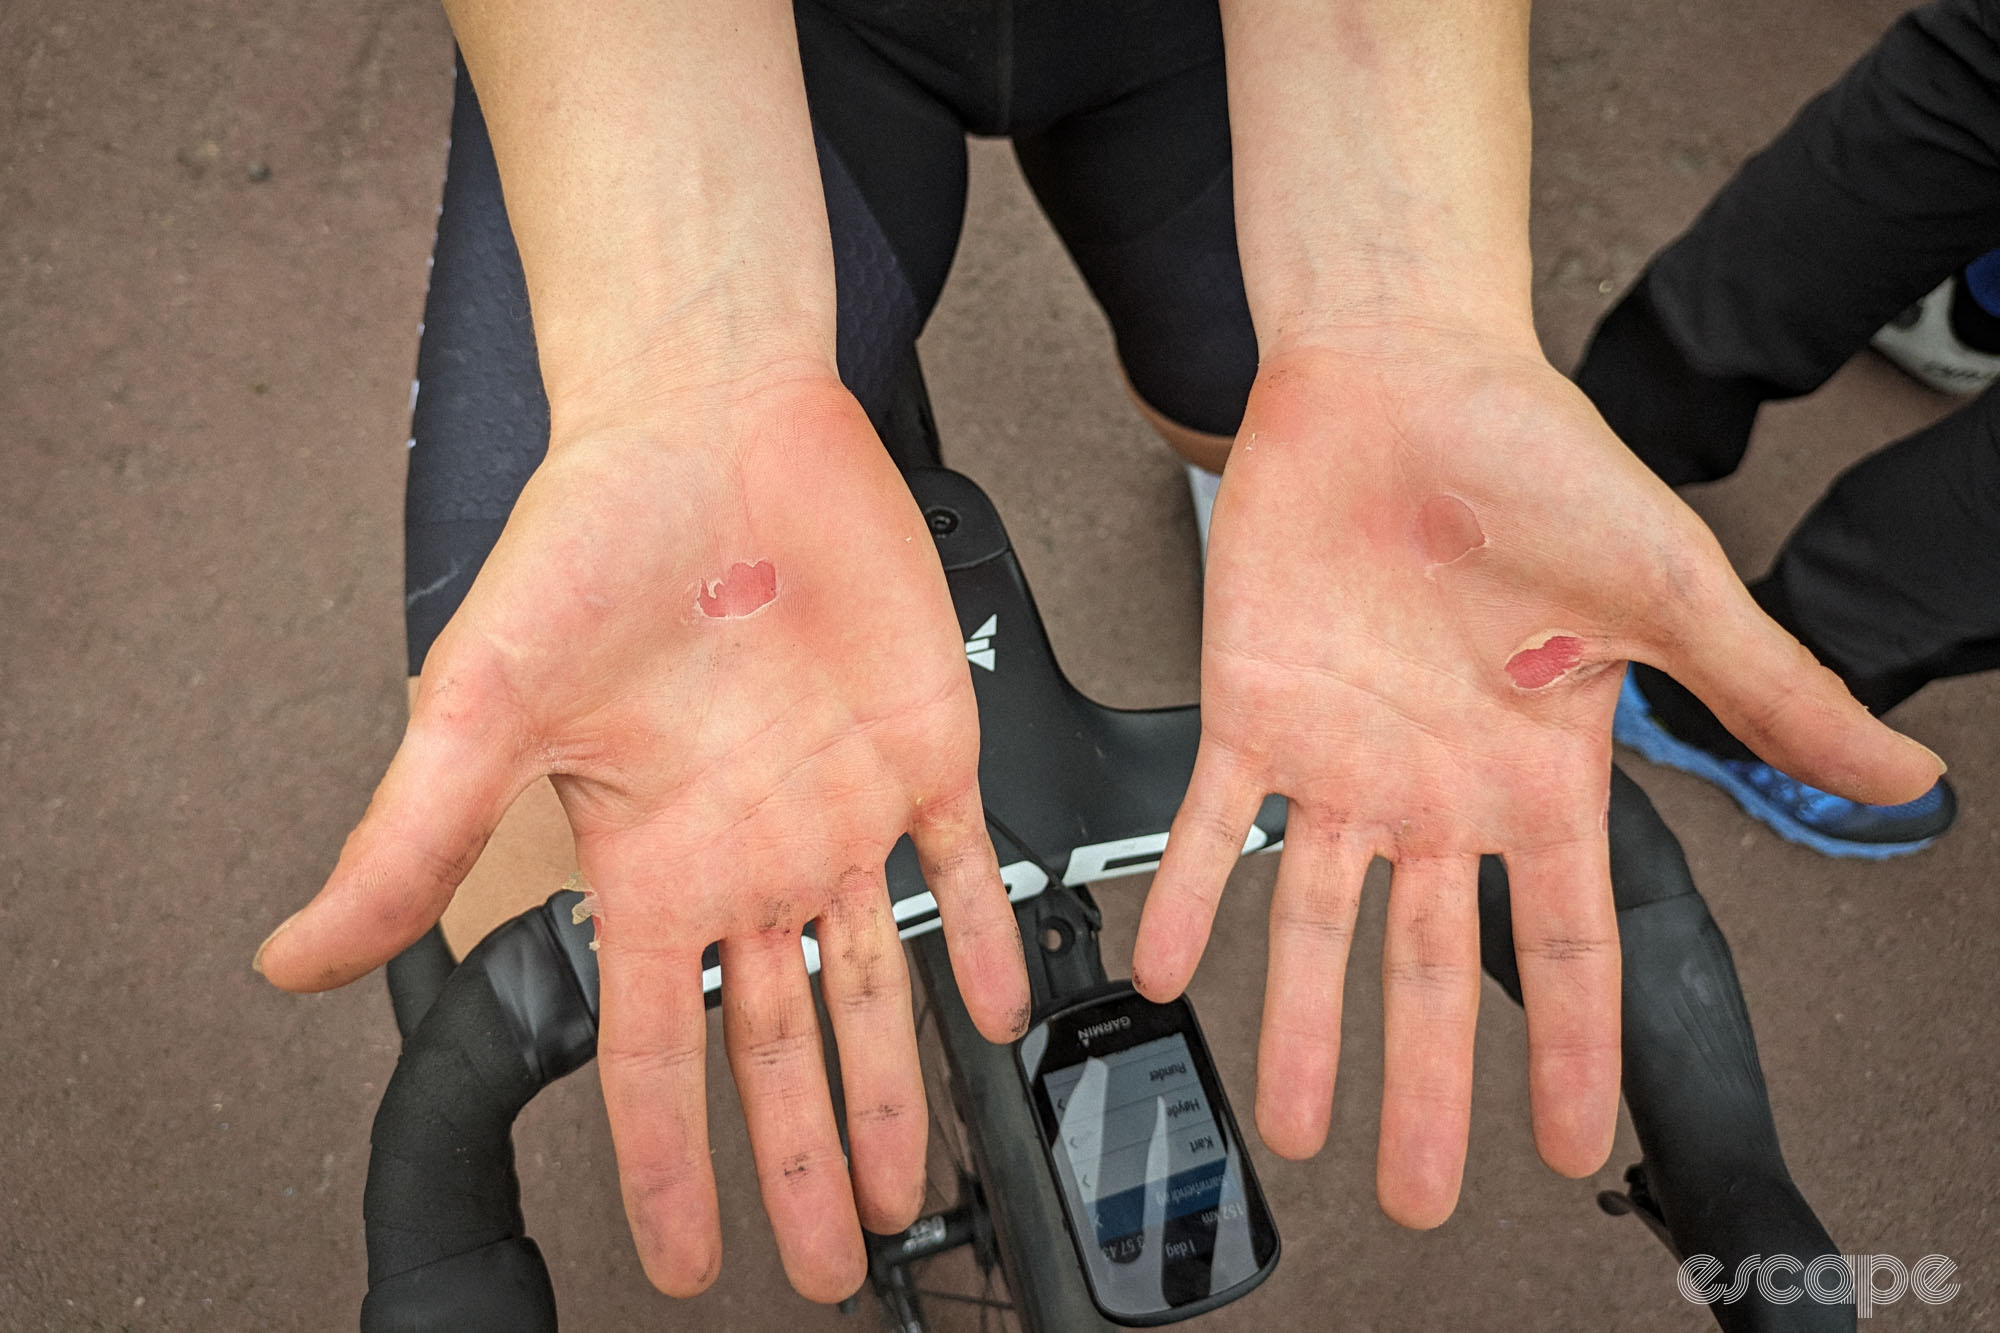 Susanne Andersen displays her hands above her handlebar. Both are dirty and have large, open blisters.